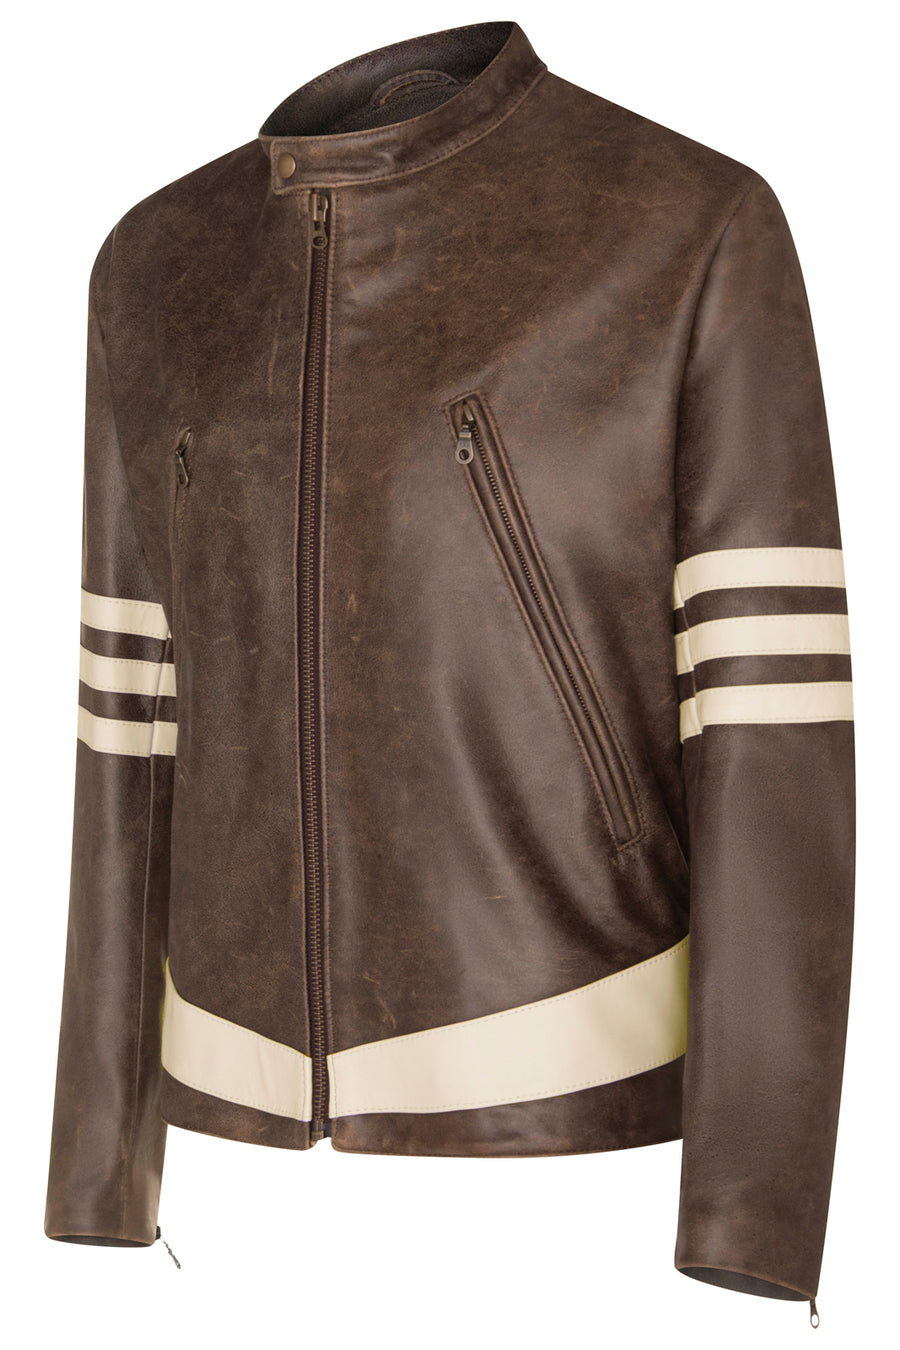 CUSTOM MADE X-Men 1 Wolverine Style Leather Jacket with Cream Stripes As Worn by Hugh Jackman